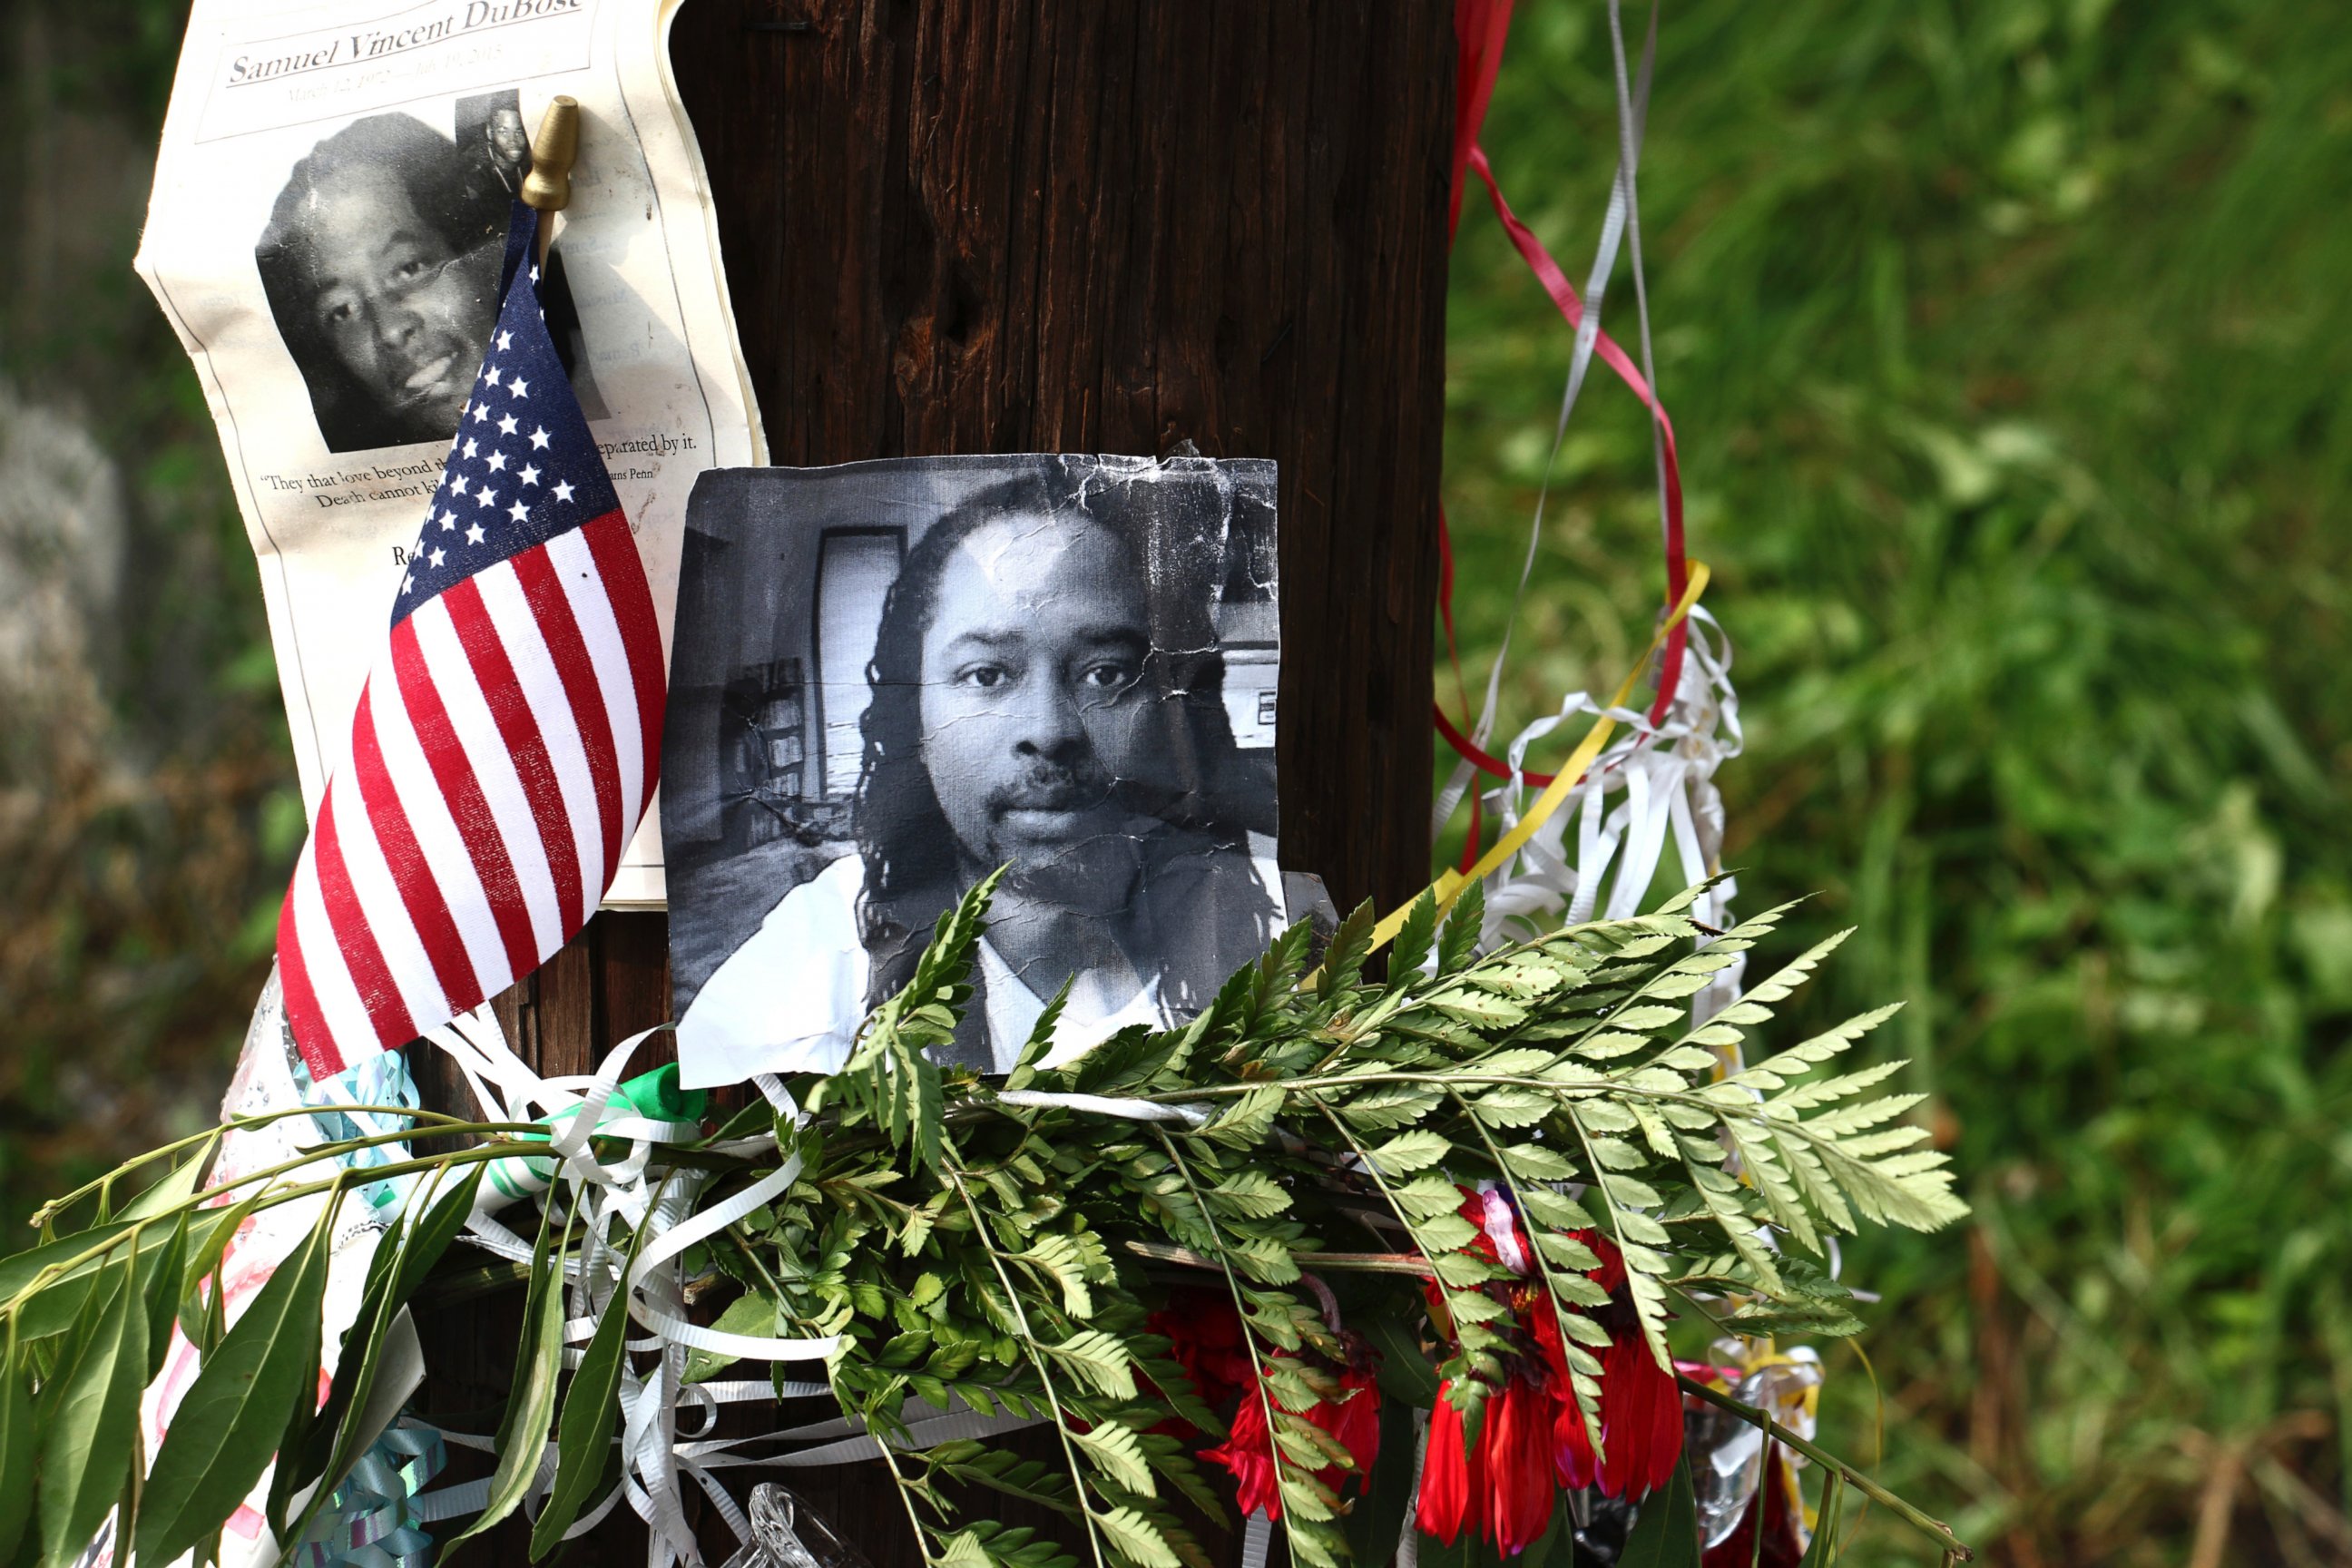 PHOTO: In this July 29, 2015, file photo, photos of Sam DuBose hang on a pole at a memorial near where he was shot and killed by a University of Cincinnati police officer during a July 19, 2015, traffic stop in Cincinnati. 